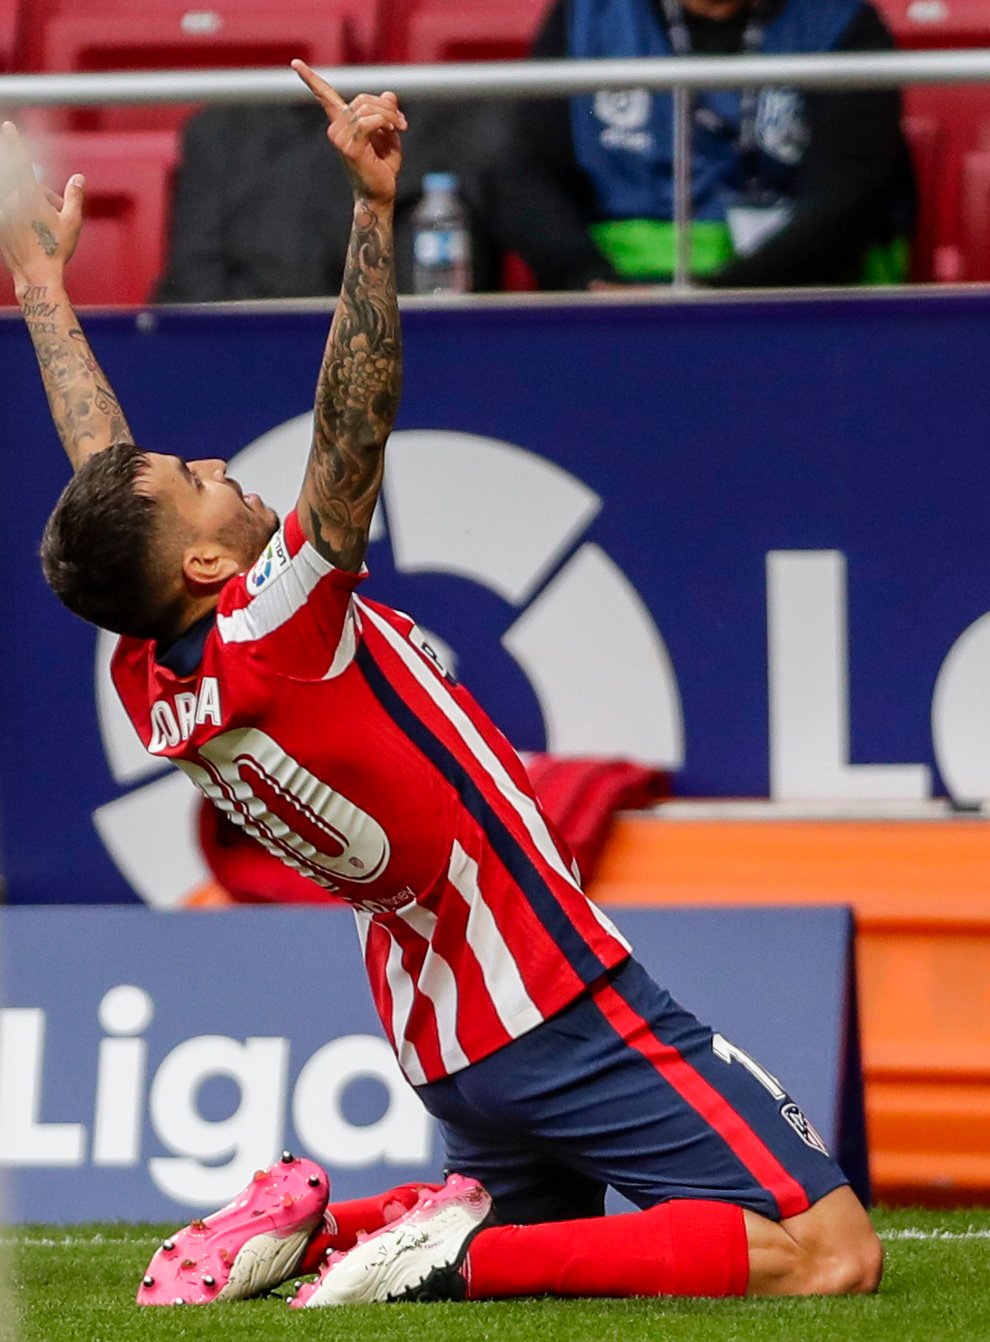 Angel Correa helped Atletico Madrid back to the top of LaLiga